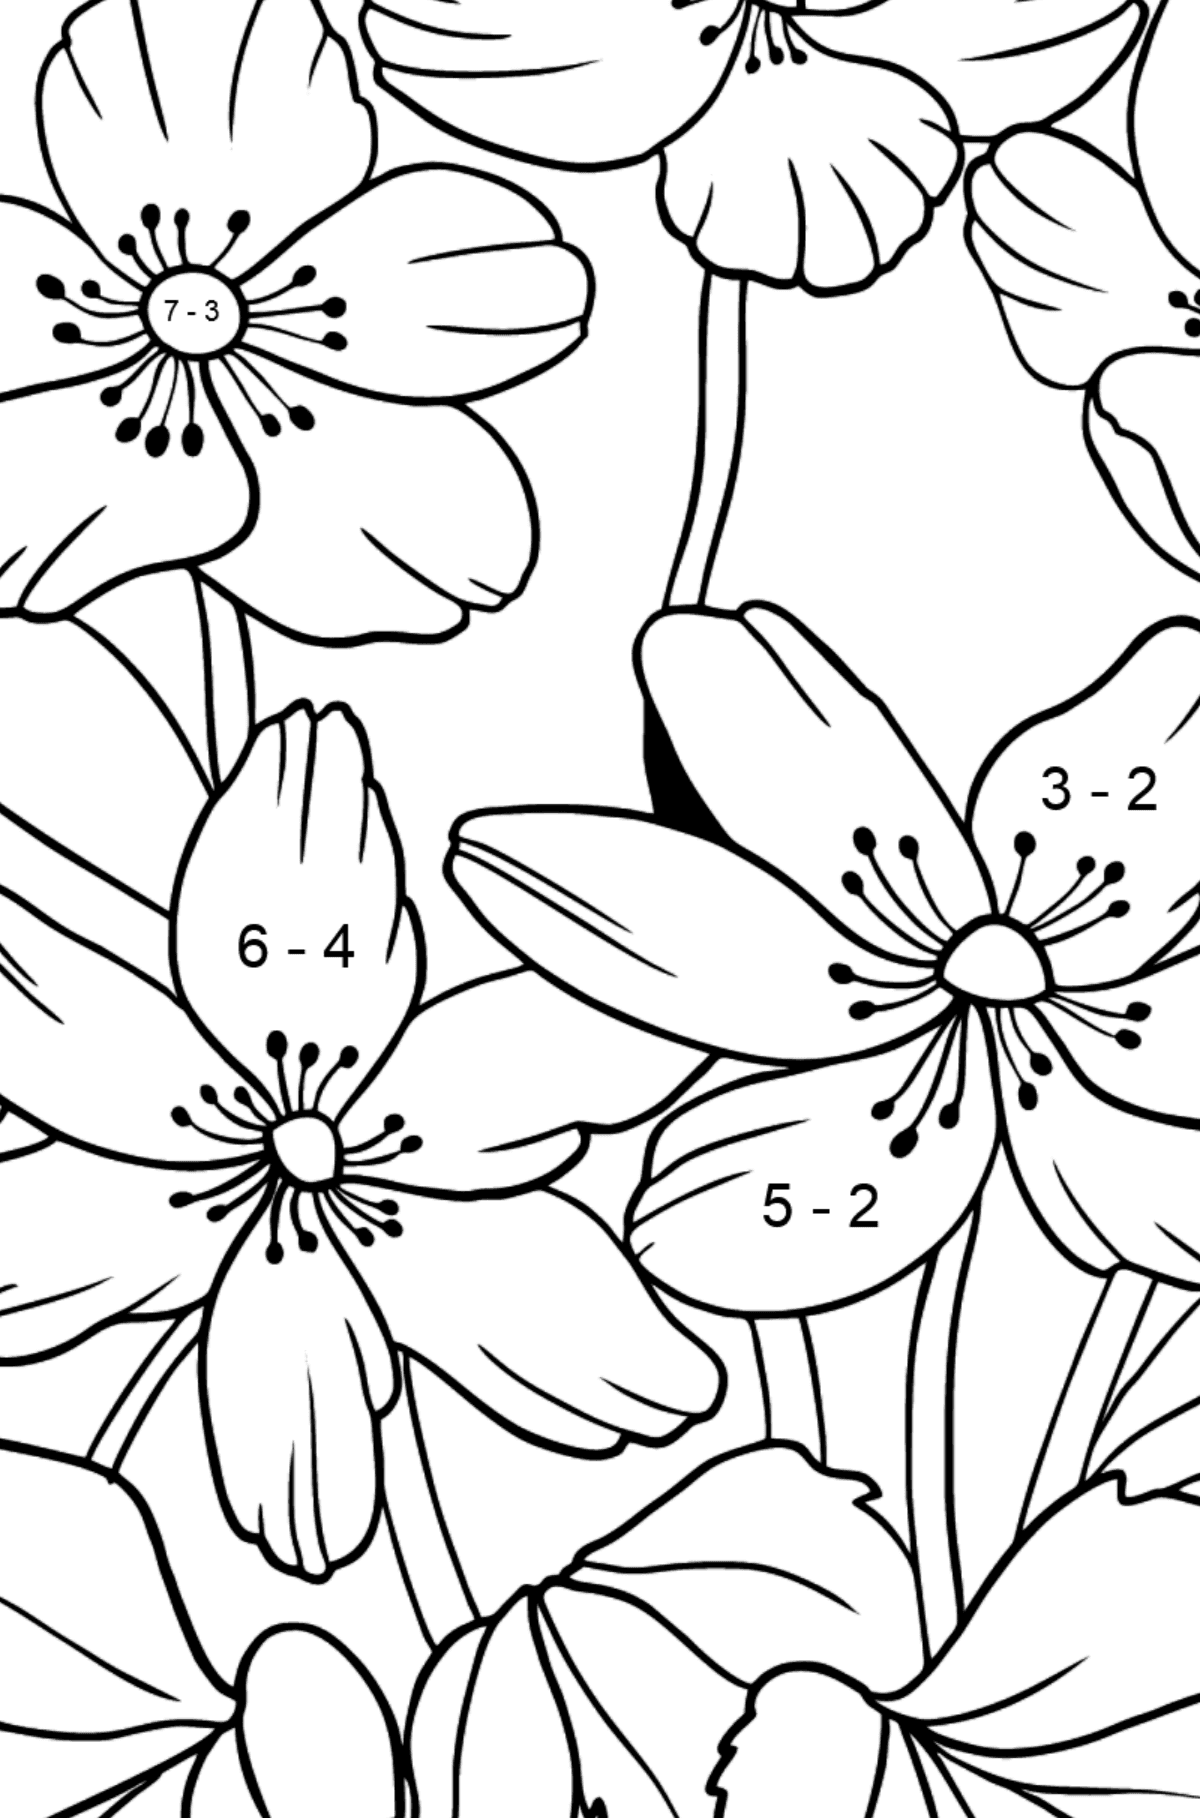 Flower Coloring Page - A Pastel Yellow Windflower - Math Coloring - Subtraction for Kids